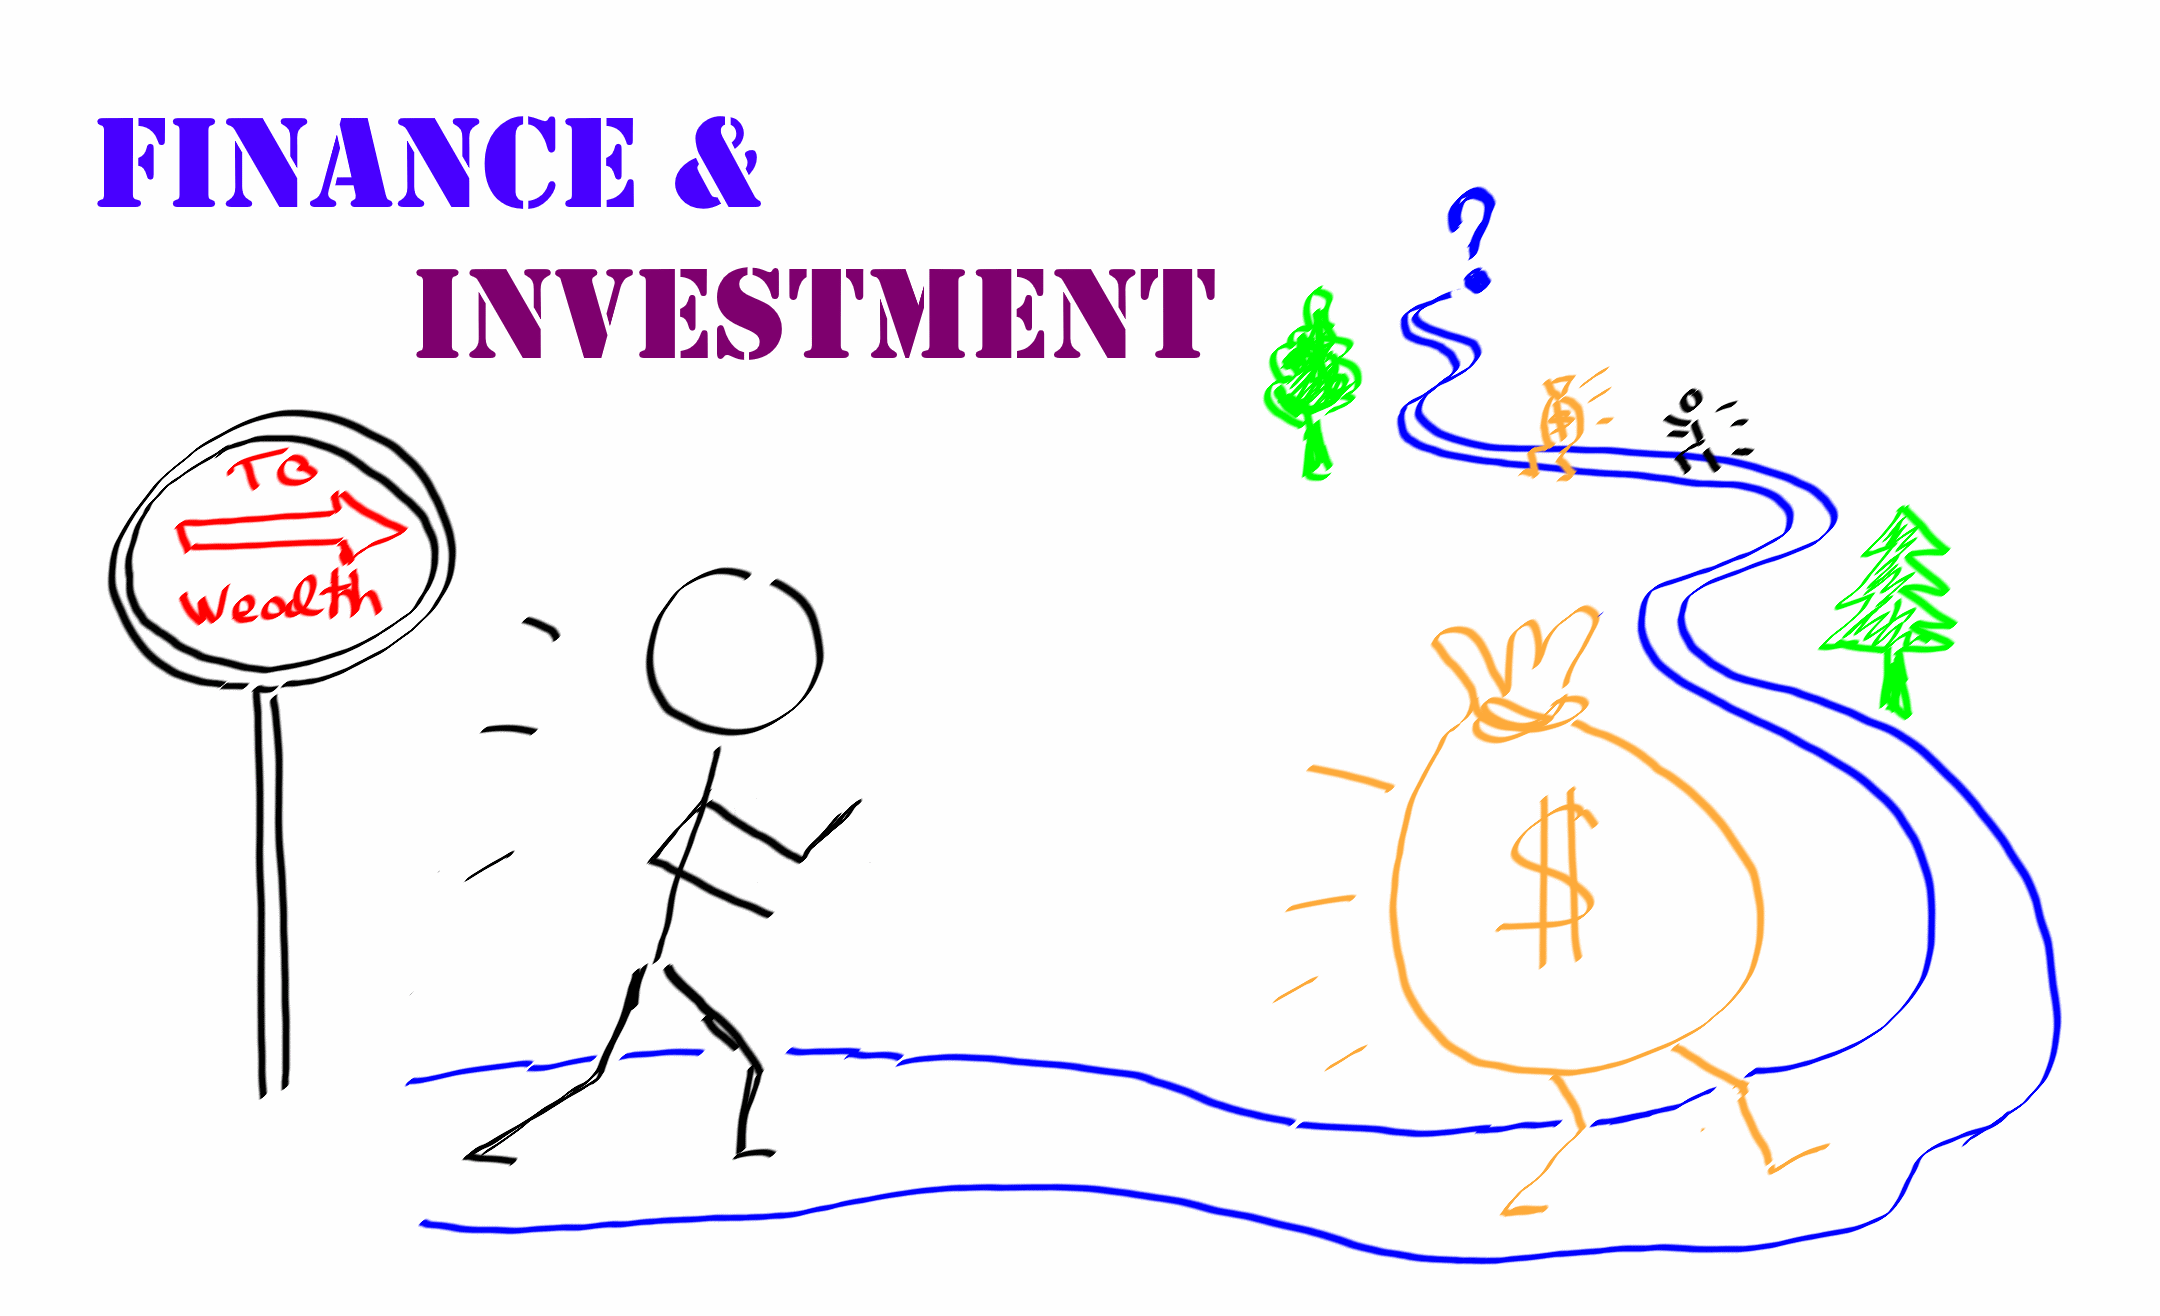 Some thoughts on finance management  and investment